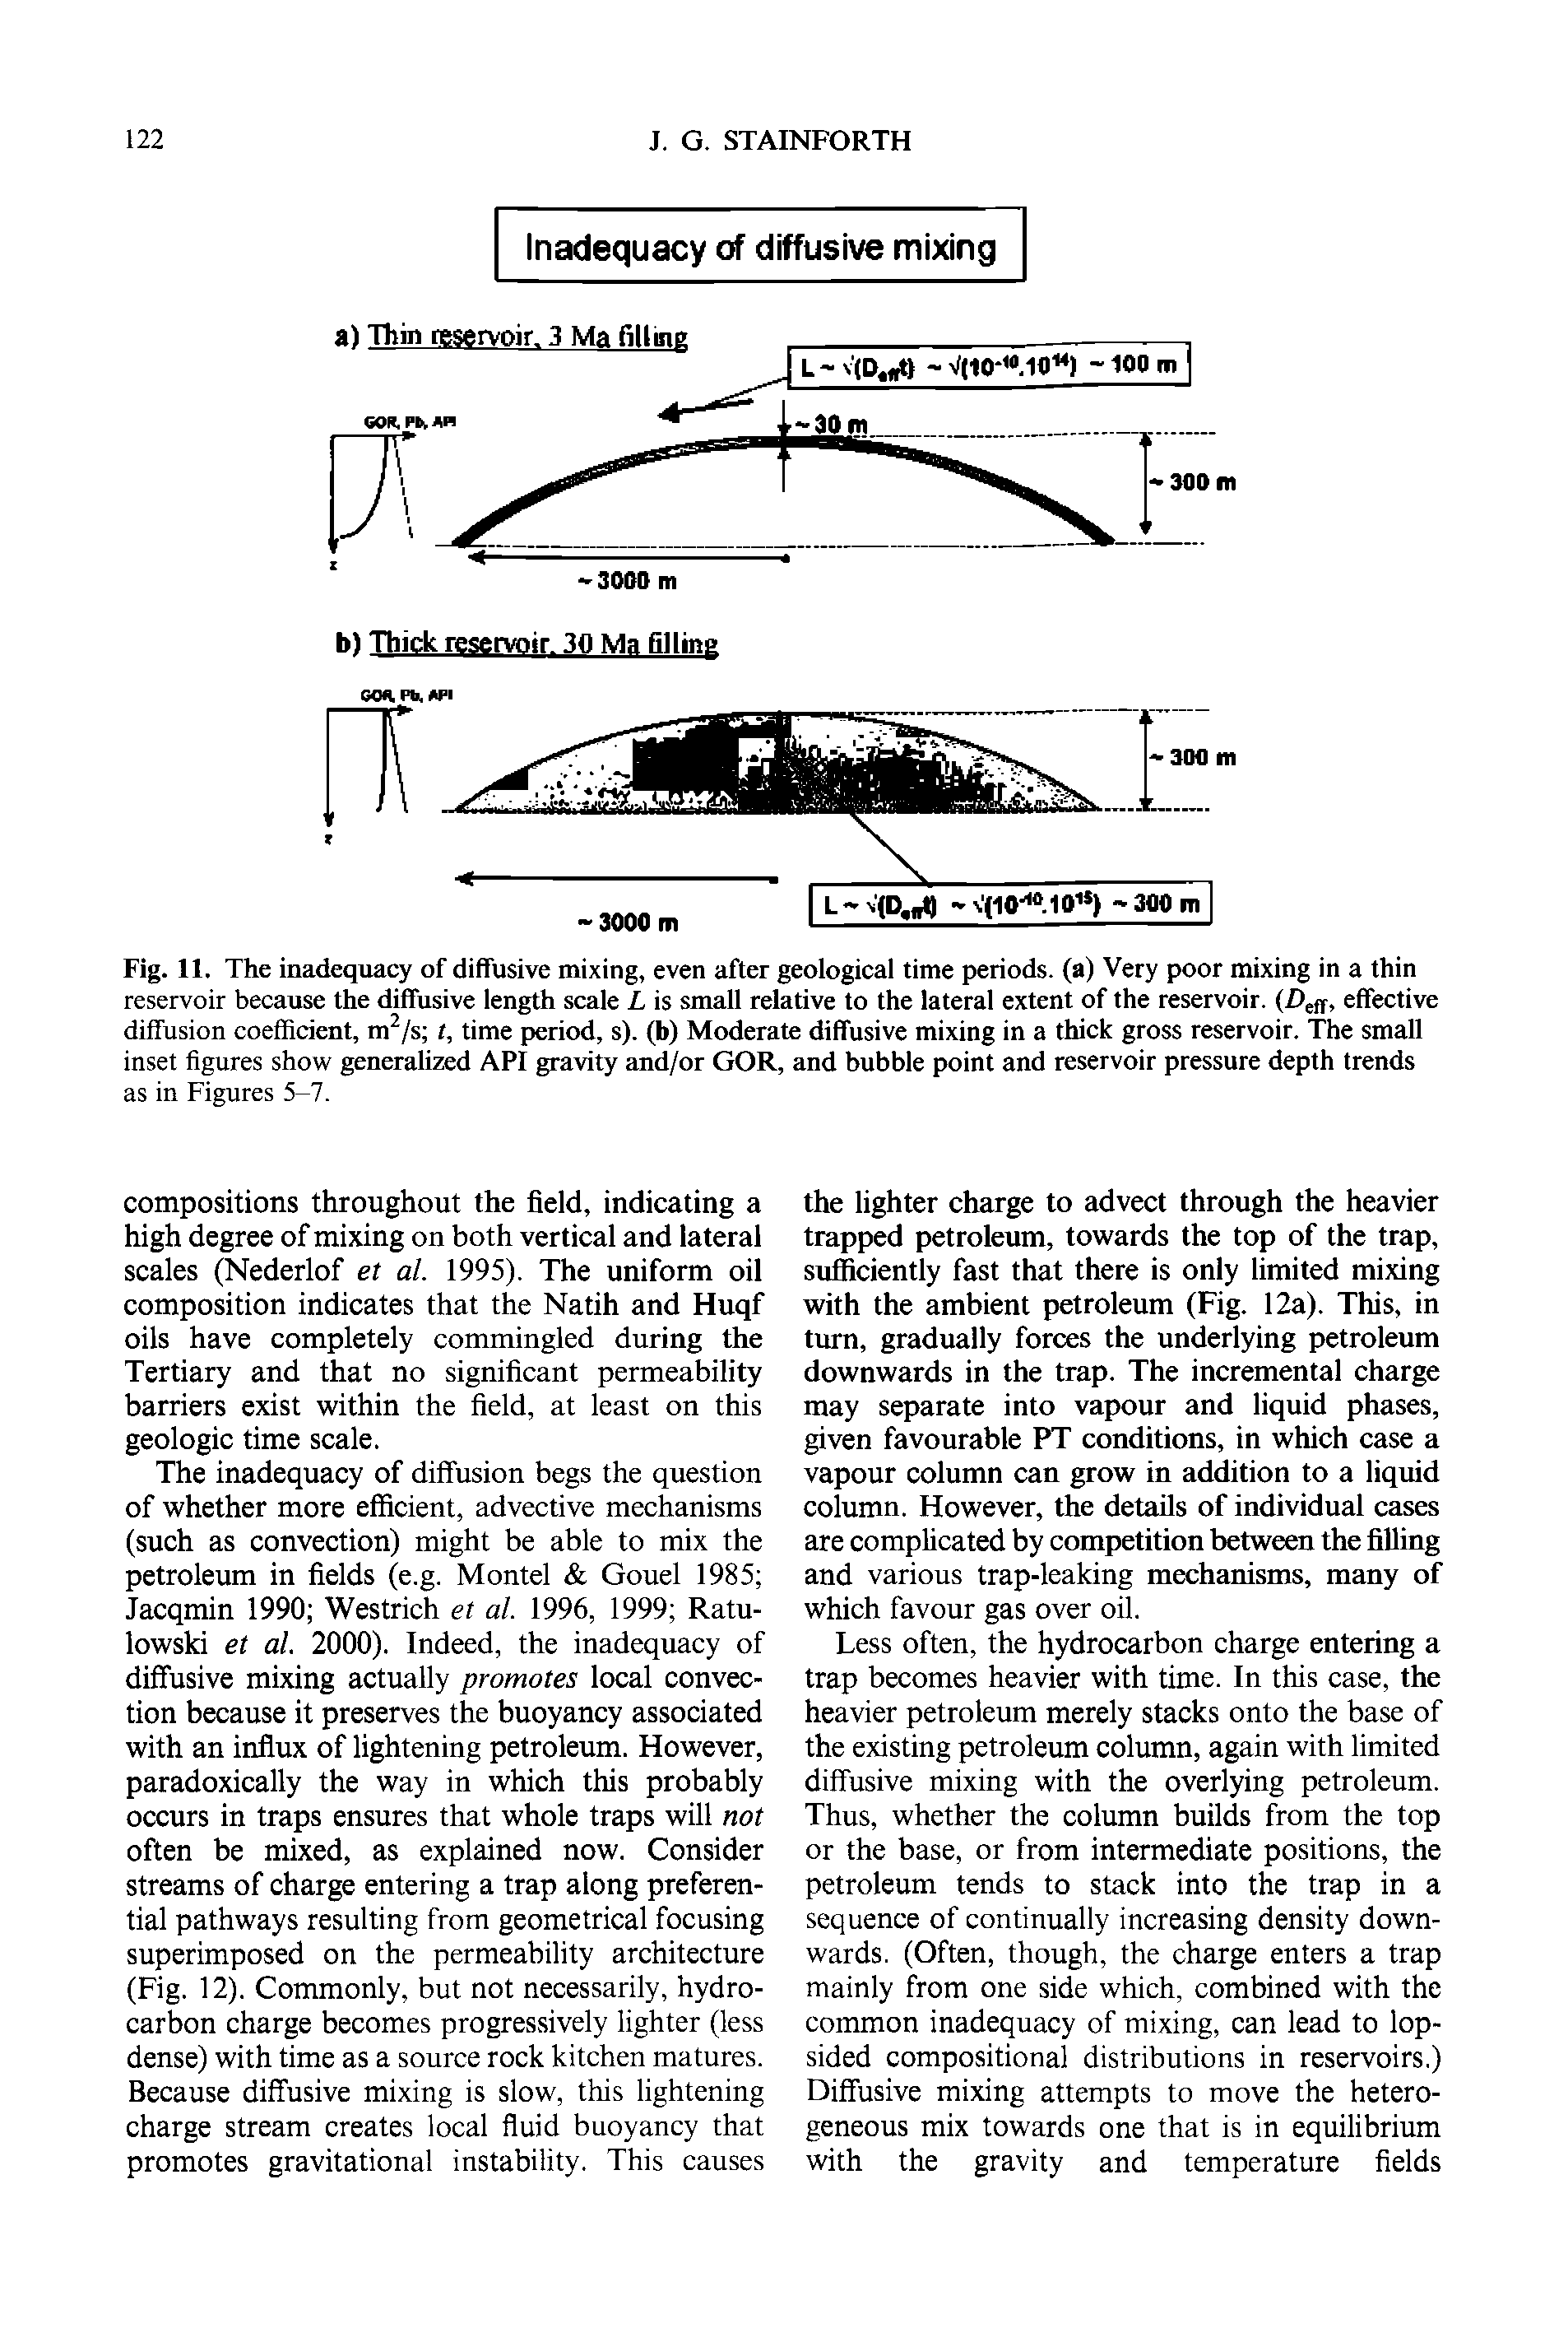 Fig. 11. The inadequacy of diffusive mixing, even after geological time periods, (a) Very poor mixing in a thin reservoir because the diffusive length scale L is small relative to the lateral extent of the reservoir. (Deff> effective diffusion coefficient, m /s t, time period, s). (b) Moderate diffusive mixing in a thick gross reservoir. The small inset figures show generalized API gravity and/or GOR, and bubble point and reservoir pressure depth trends...